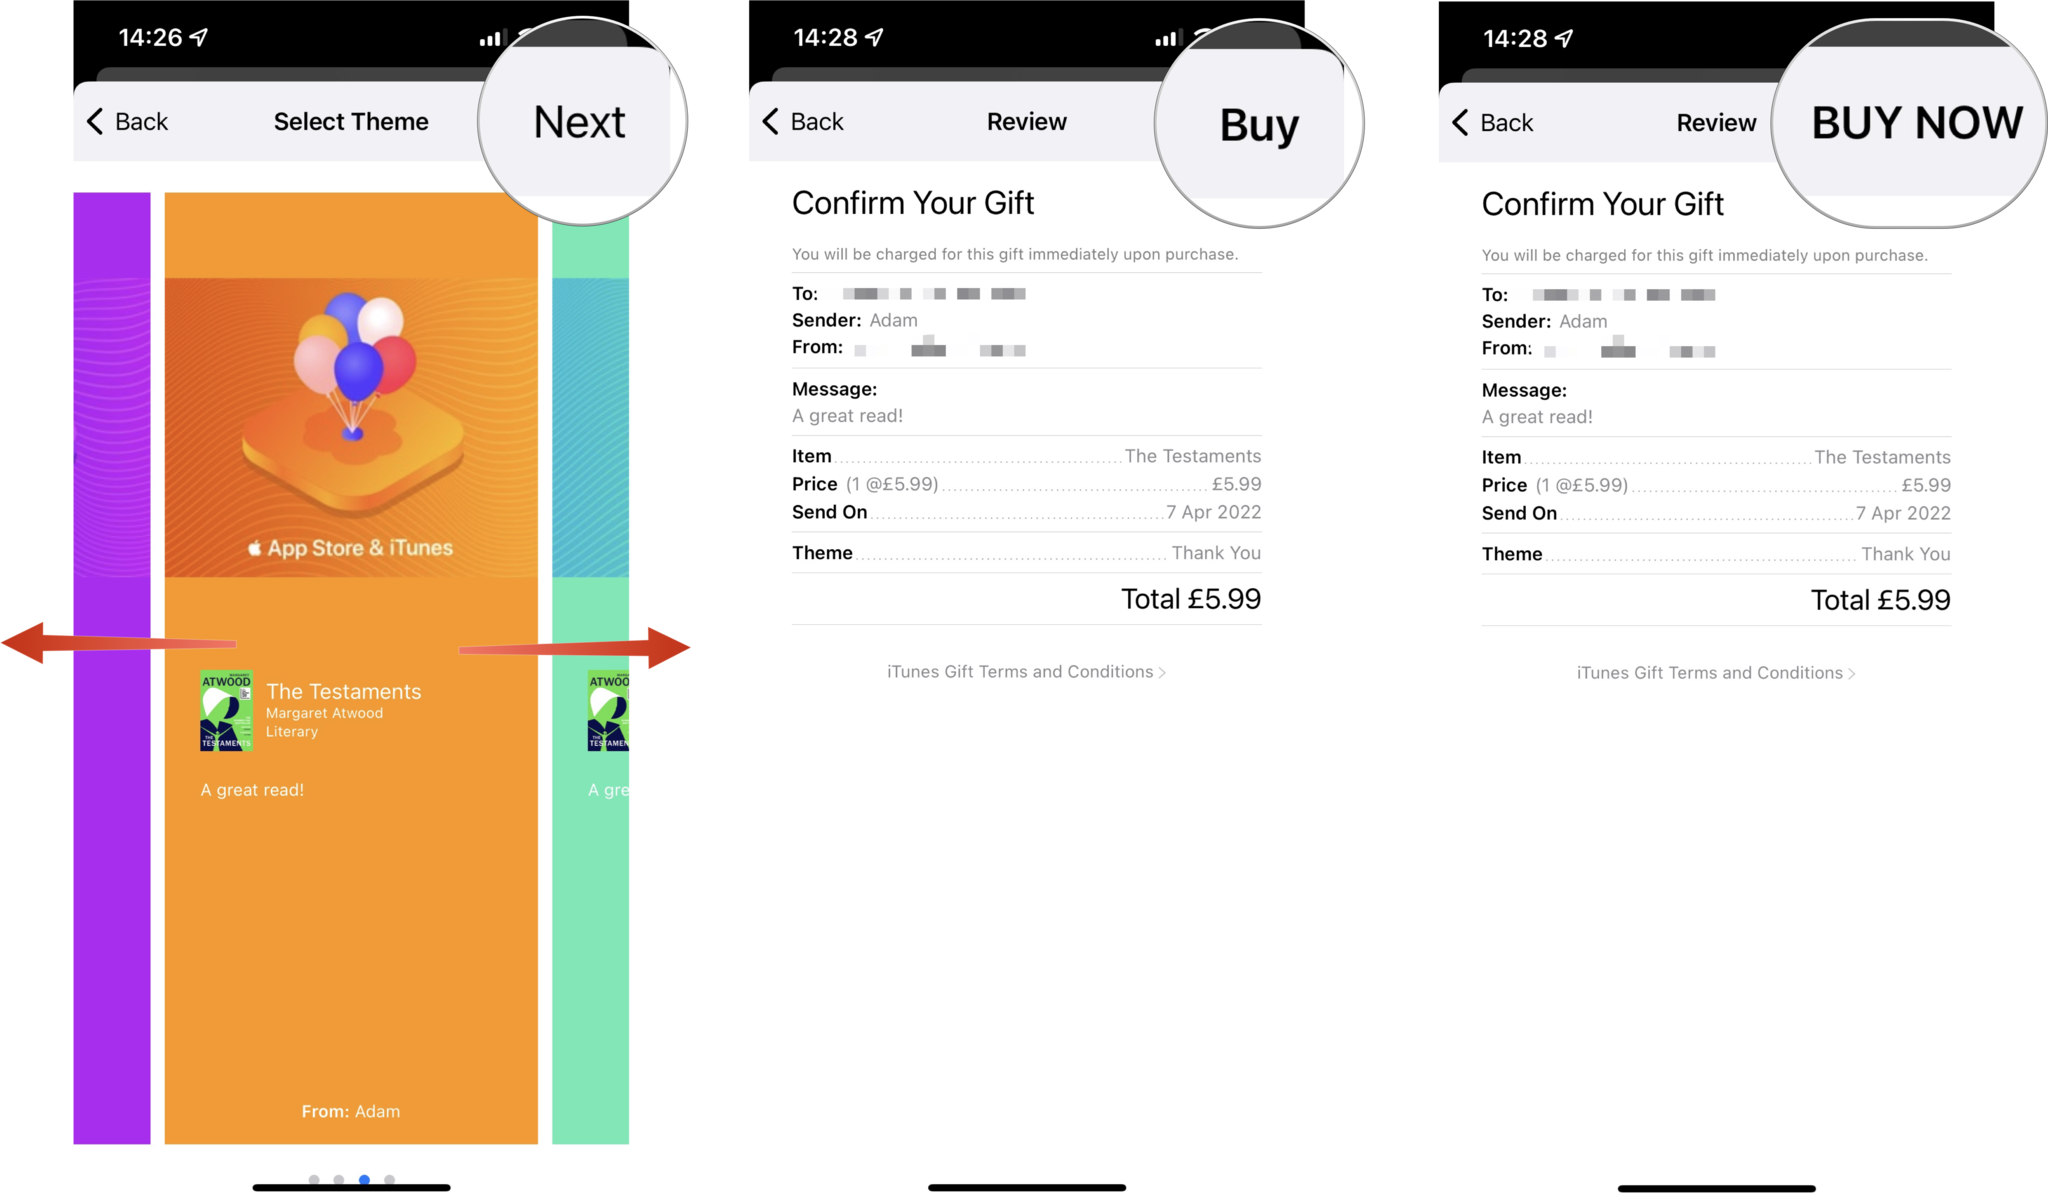 How to gift a book to someone else in Apple Books: Swipe to choose a Theme, tap Next, tap Buy, then tap Buy Now to confirm